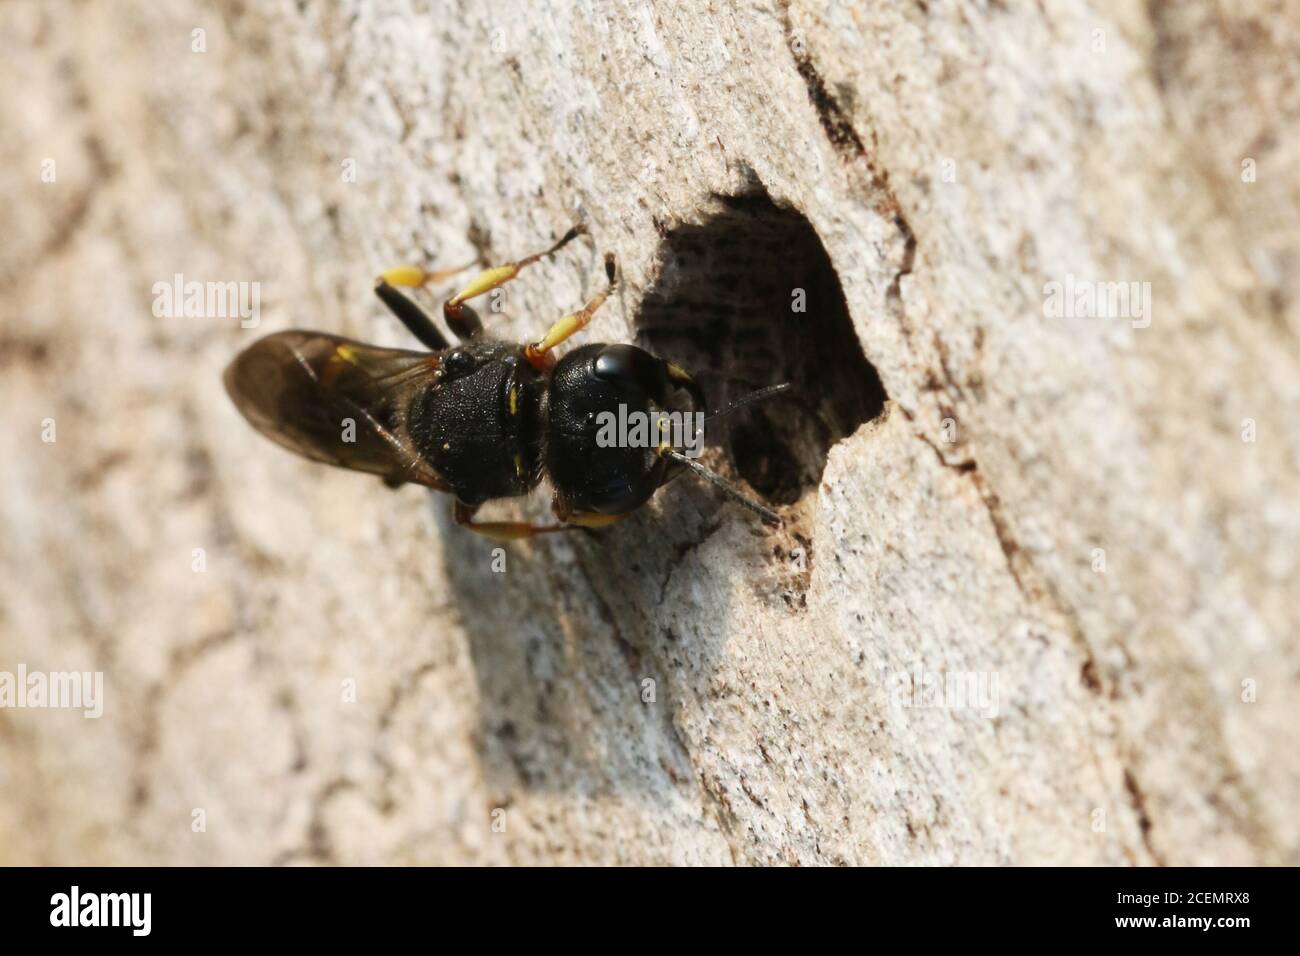 An Ectemnius wasp species, possibly E. continuus, on the trunk of a fallen beech tree at Hunterston in Ayrshire. Stock Photo